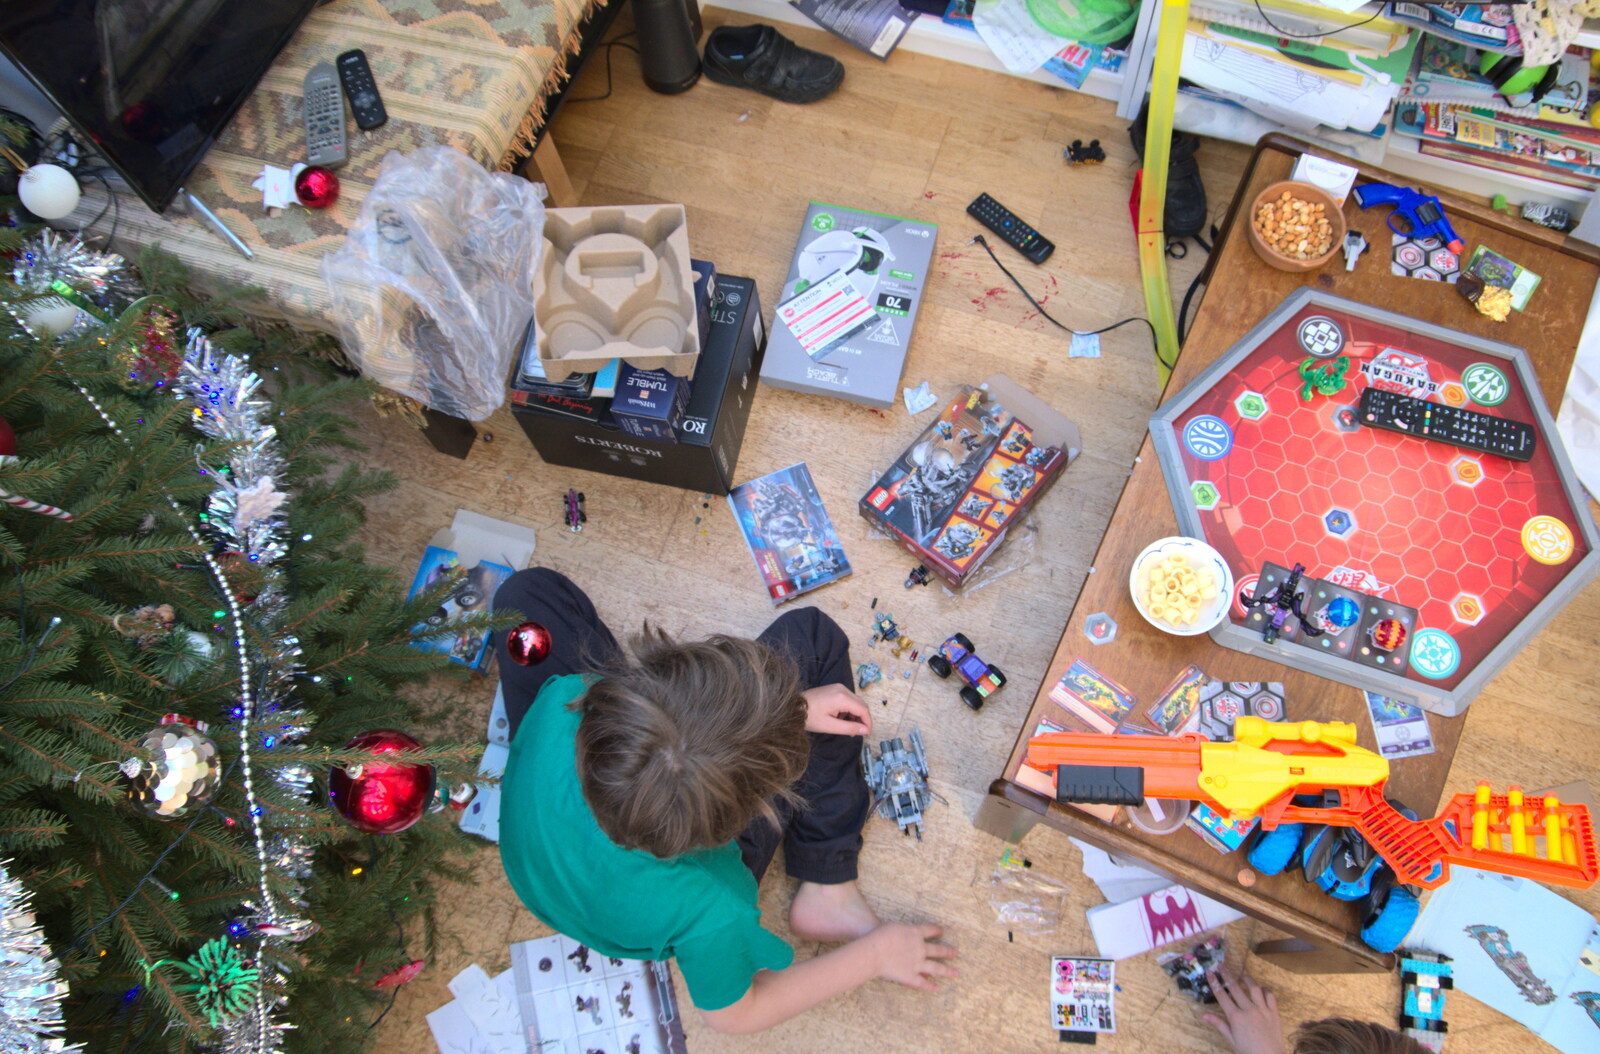 An aerial view of Fred's Lego from Christmas Day, Brome, Suffolk - 25th December 2020